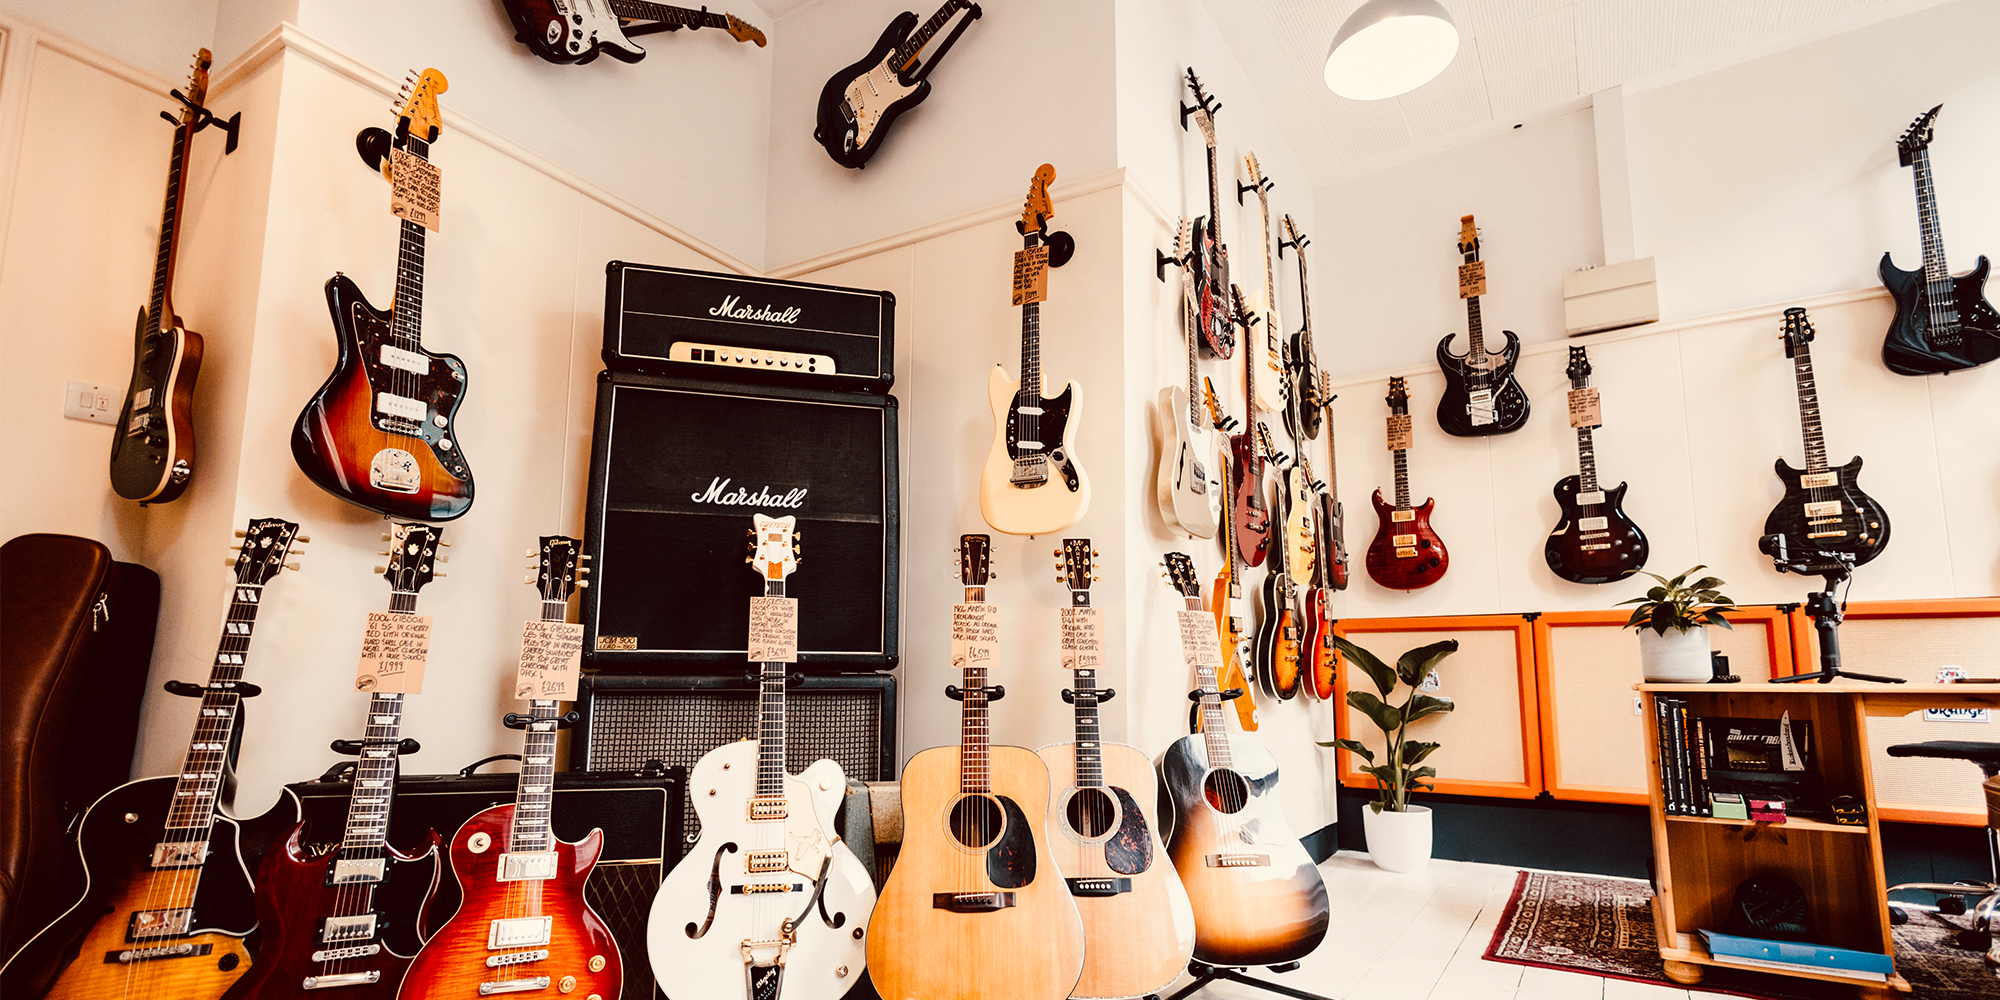 Pre-Owned, Used and Second Hand Guitars